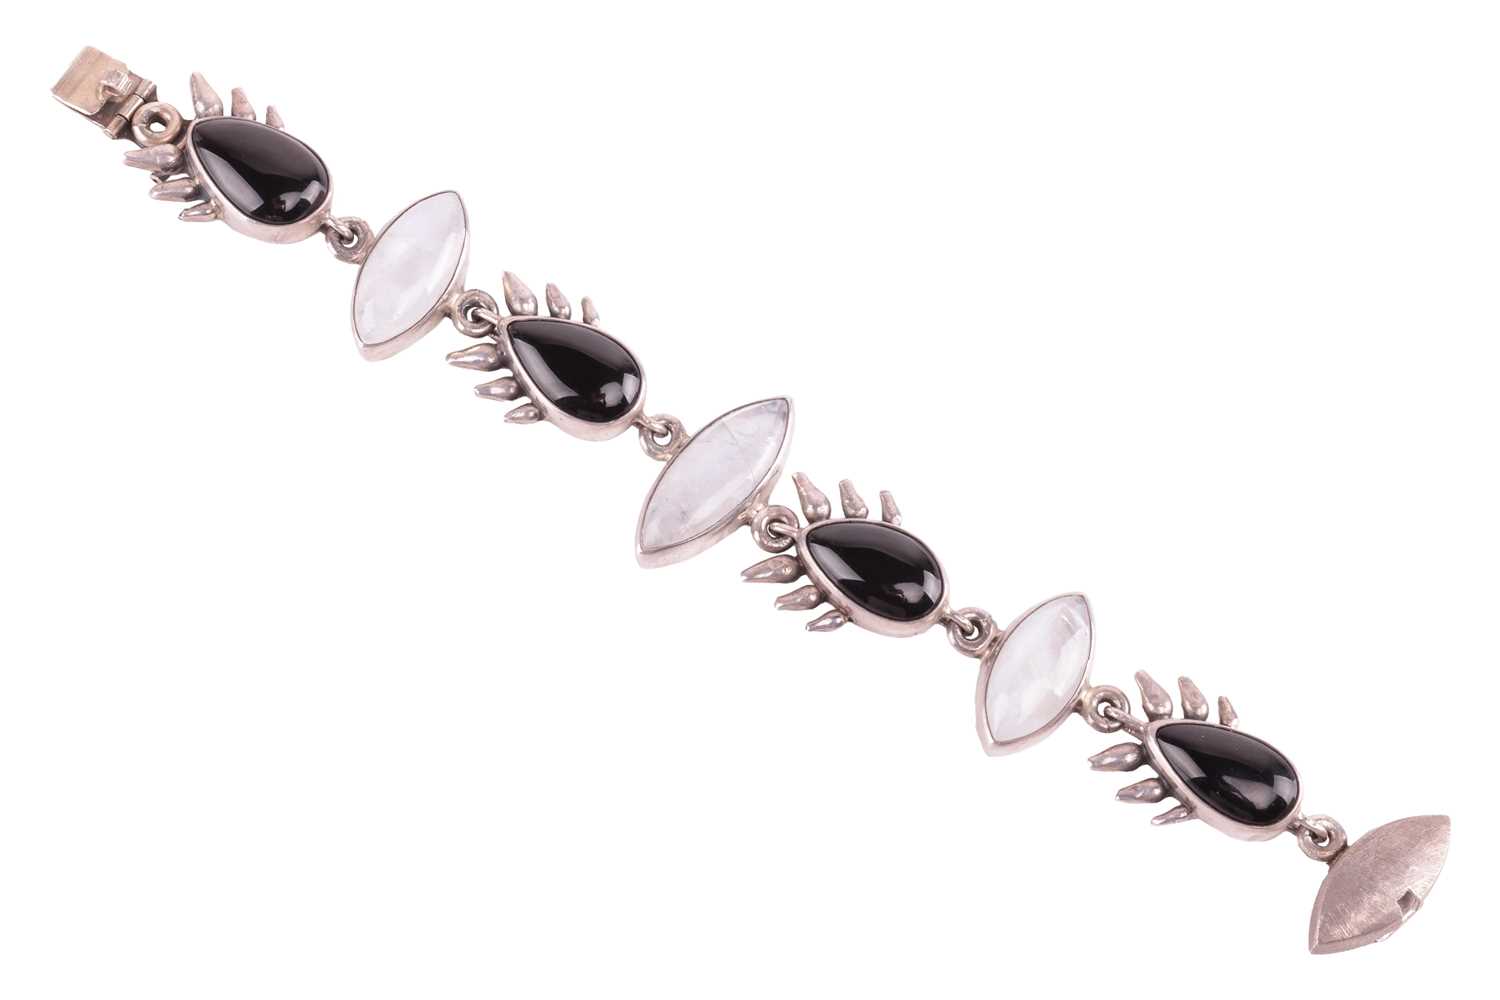 A Whitby jet and labradorite link bracelet in silver, comprising four pear-shaped jets flanking thre